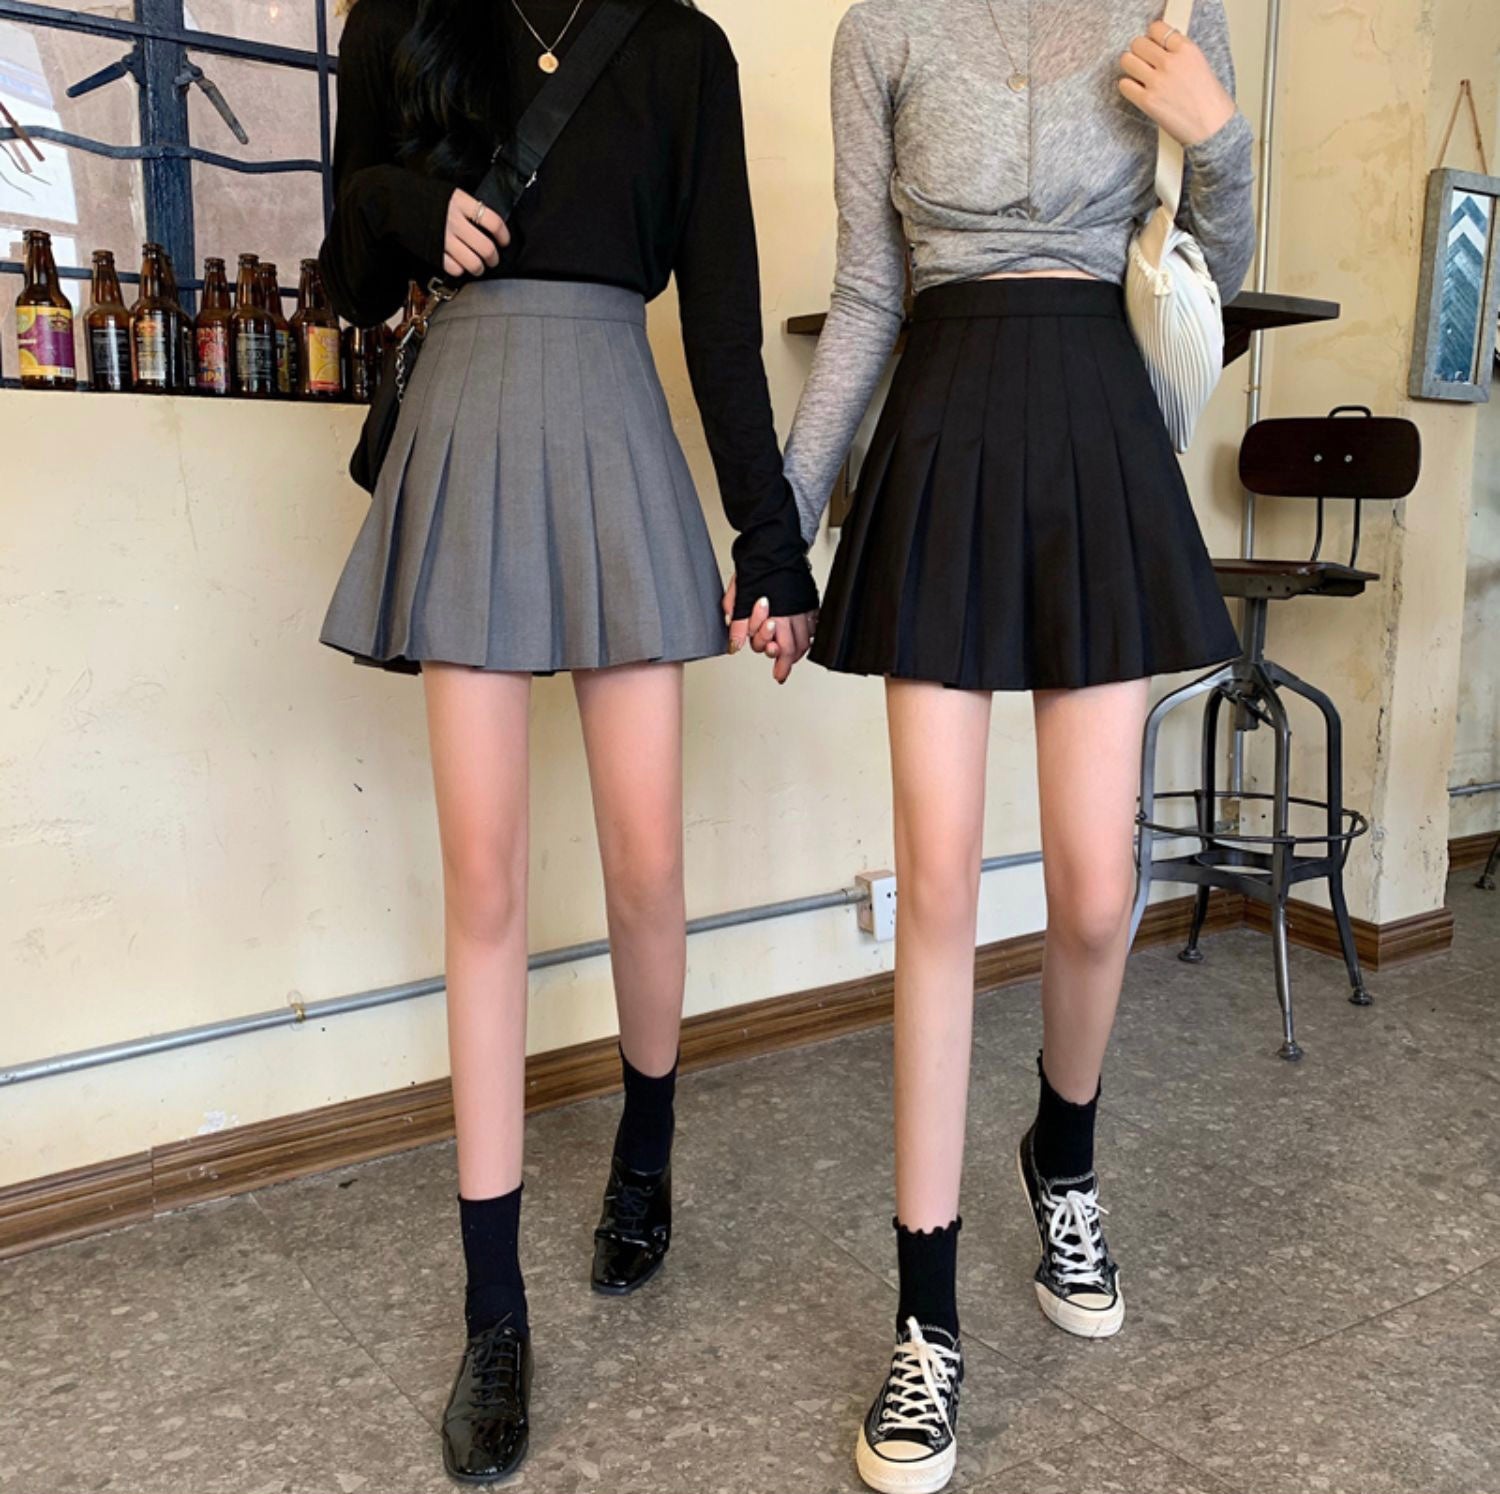 [Korean Style] Solid Color Pleated A-line Short Skirt